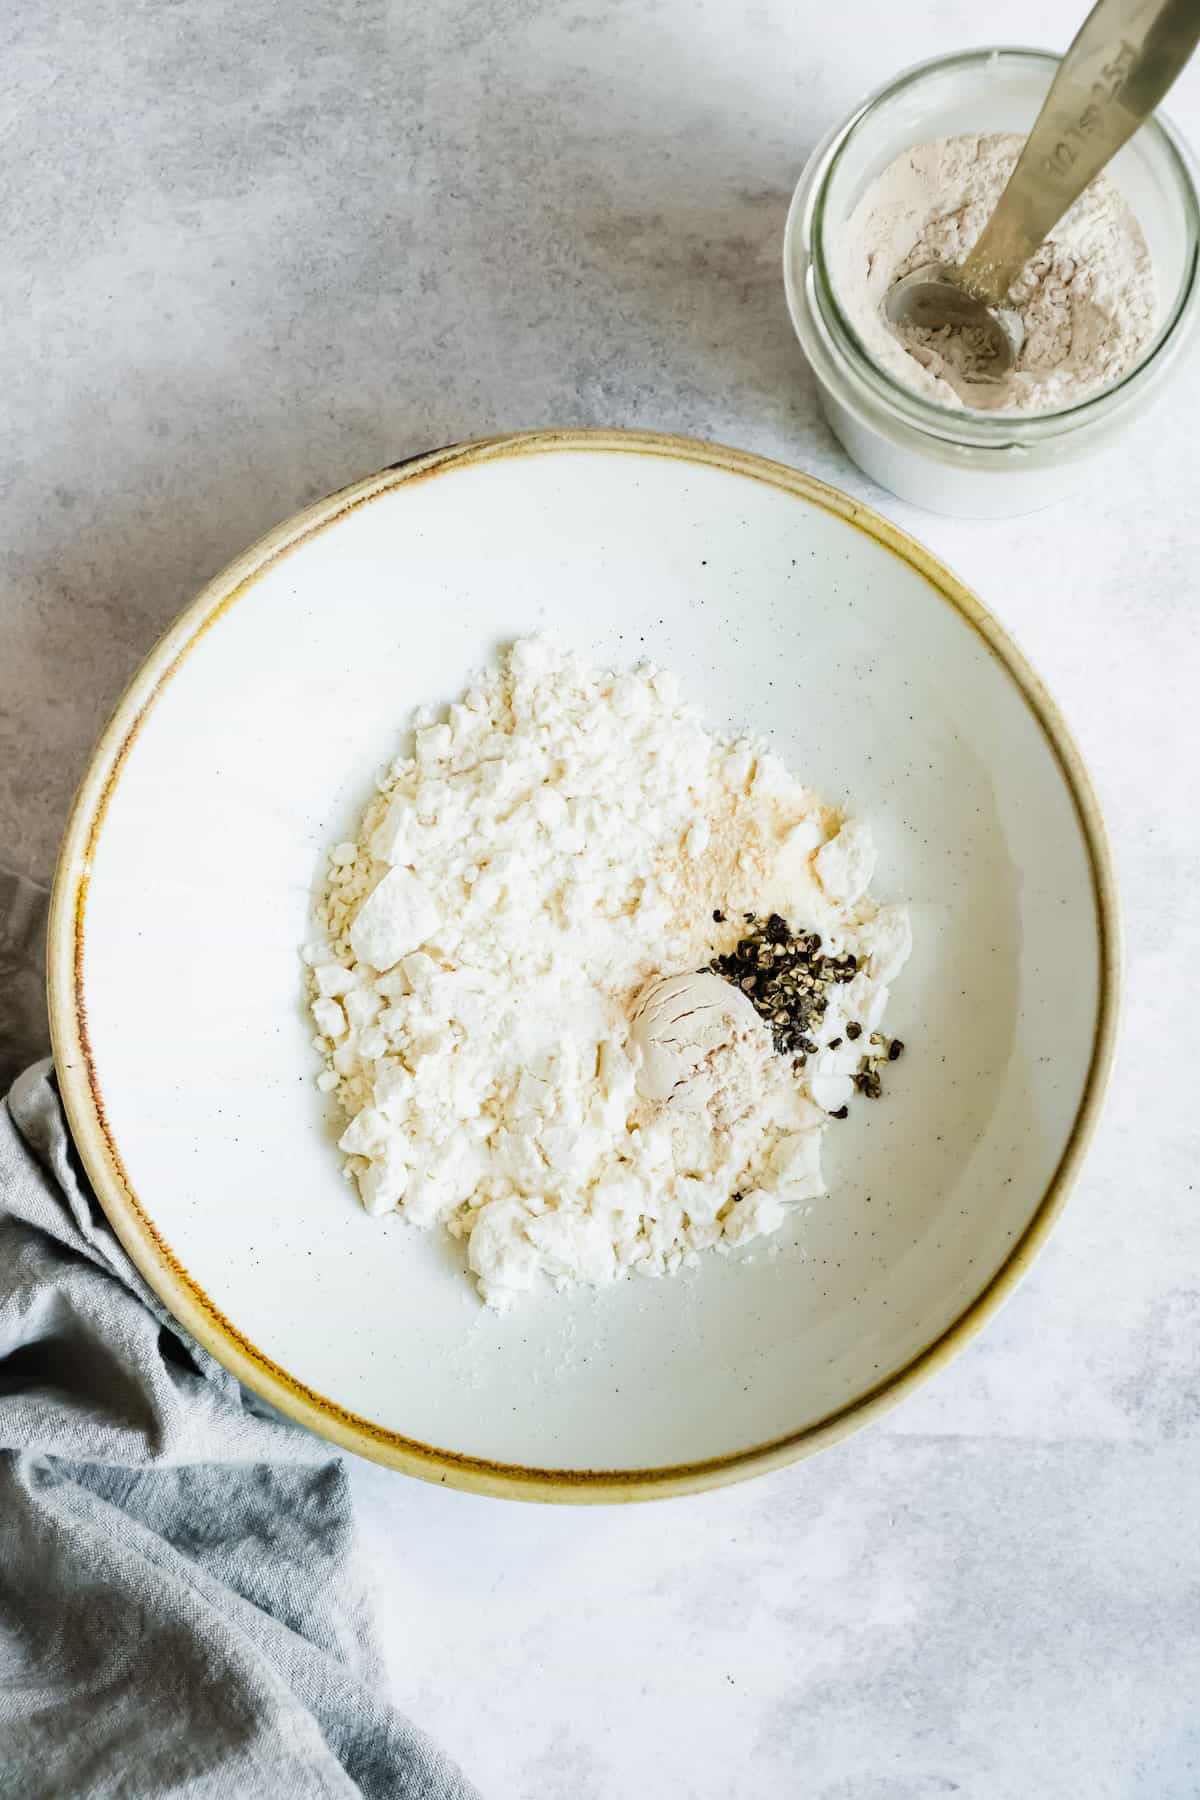 A white bowl of flour with crushed black pepper.